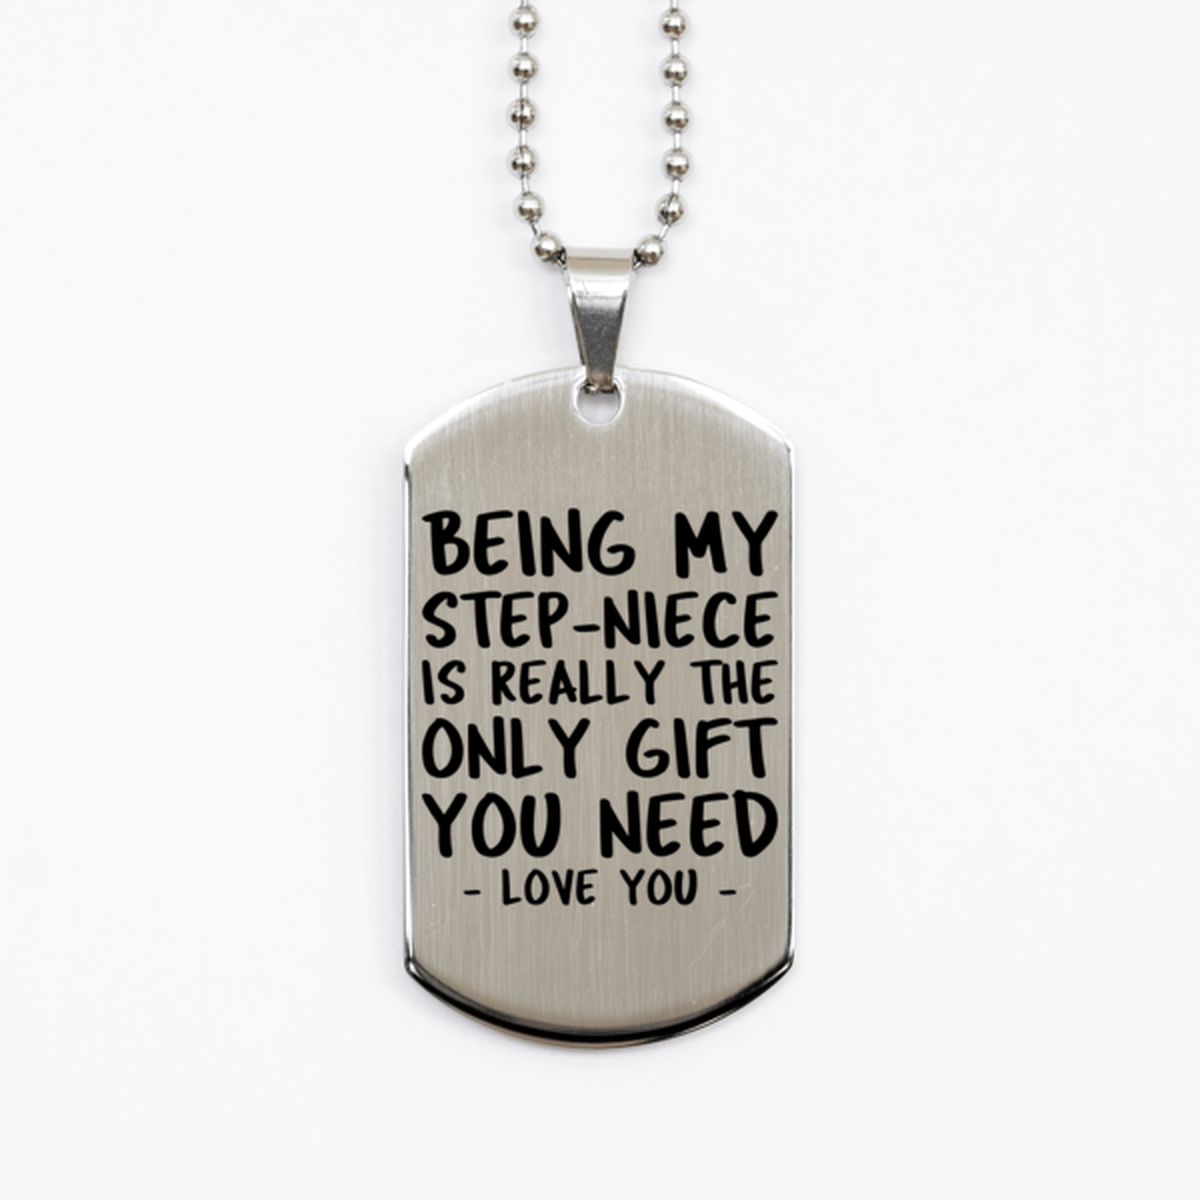 Funny Step-niece Silver Dog Tag Necklace, Being My Step-niece Is Really the Only Gift You Need, Best Birthday Gifts for Step-niece